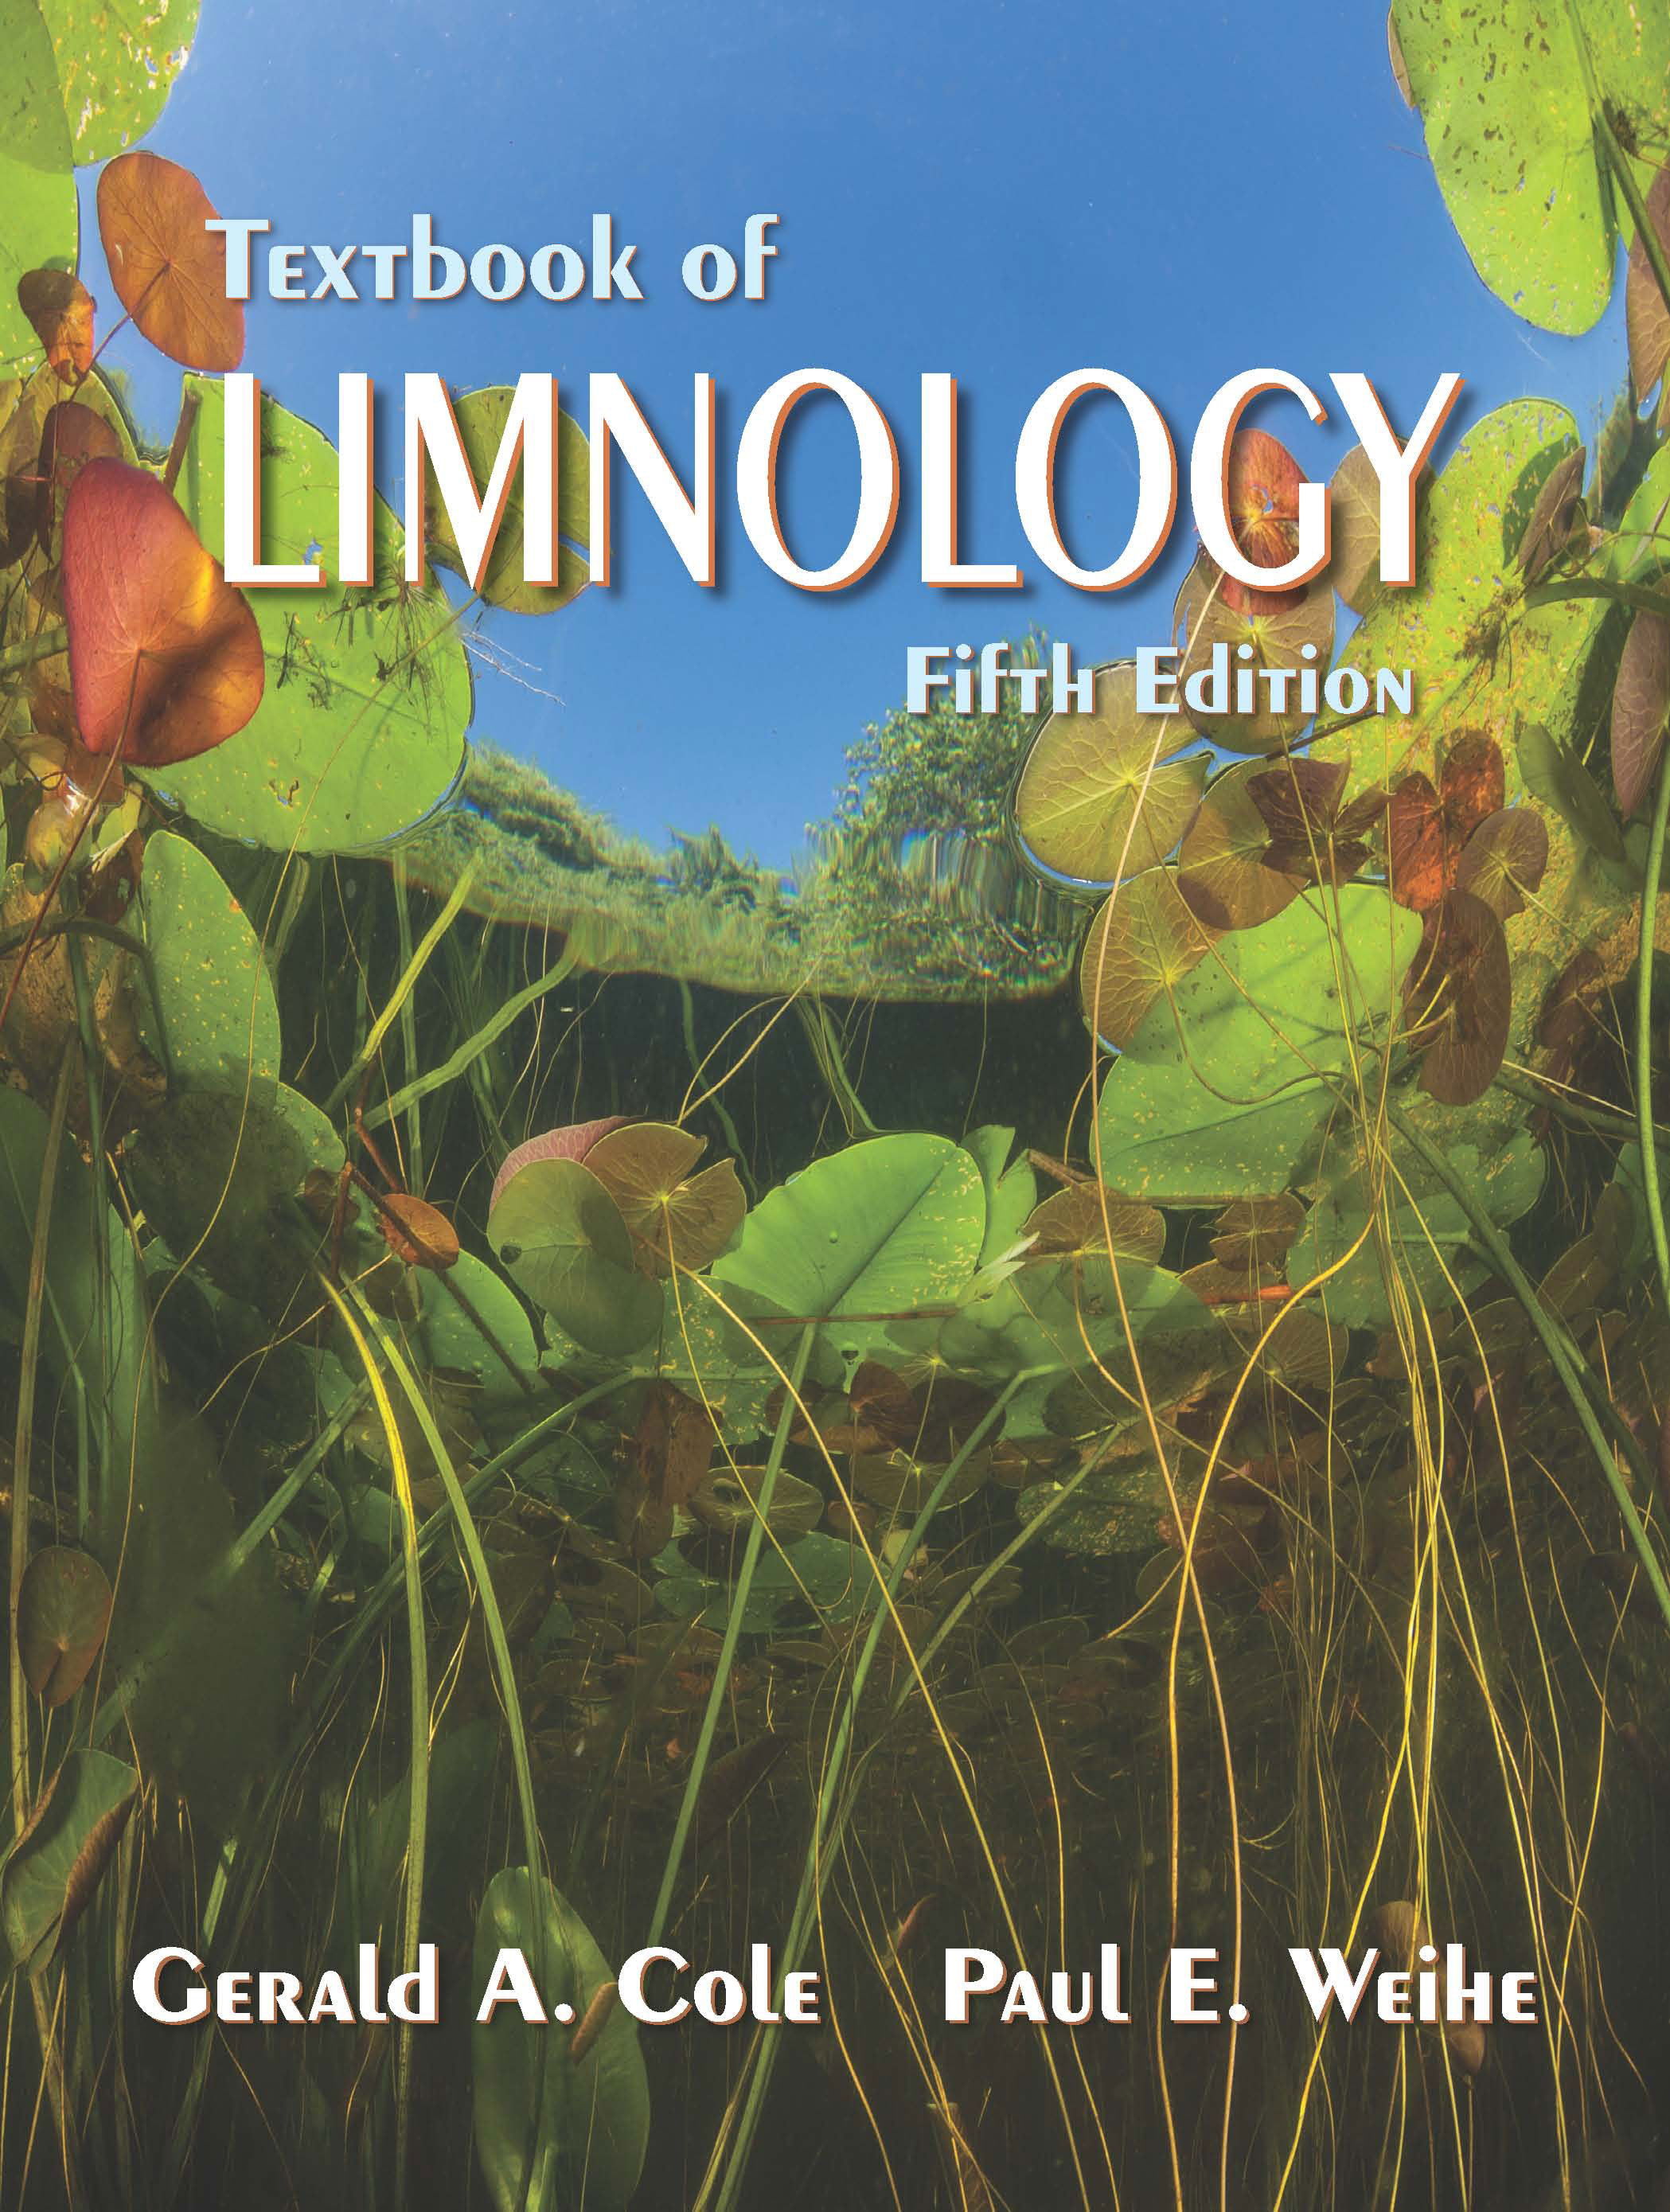 Textbook of Limnology: Fifth Edition by Gerald A. Cole, Paul E. Weihe